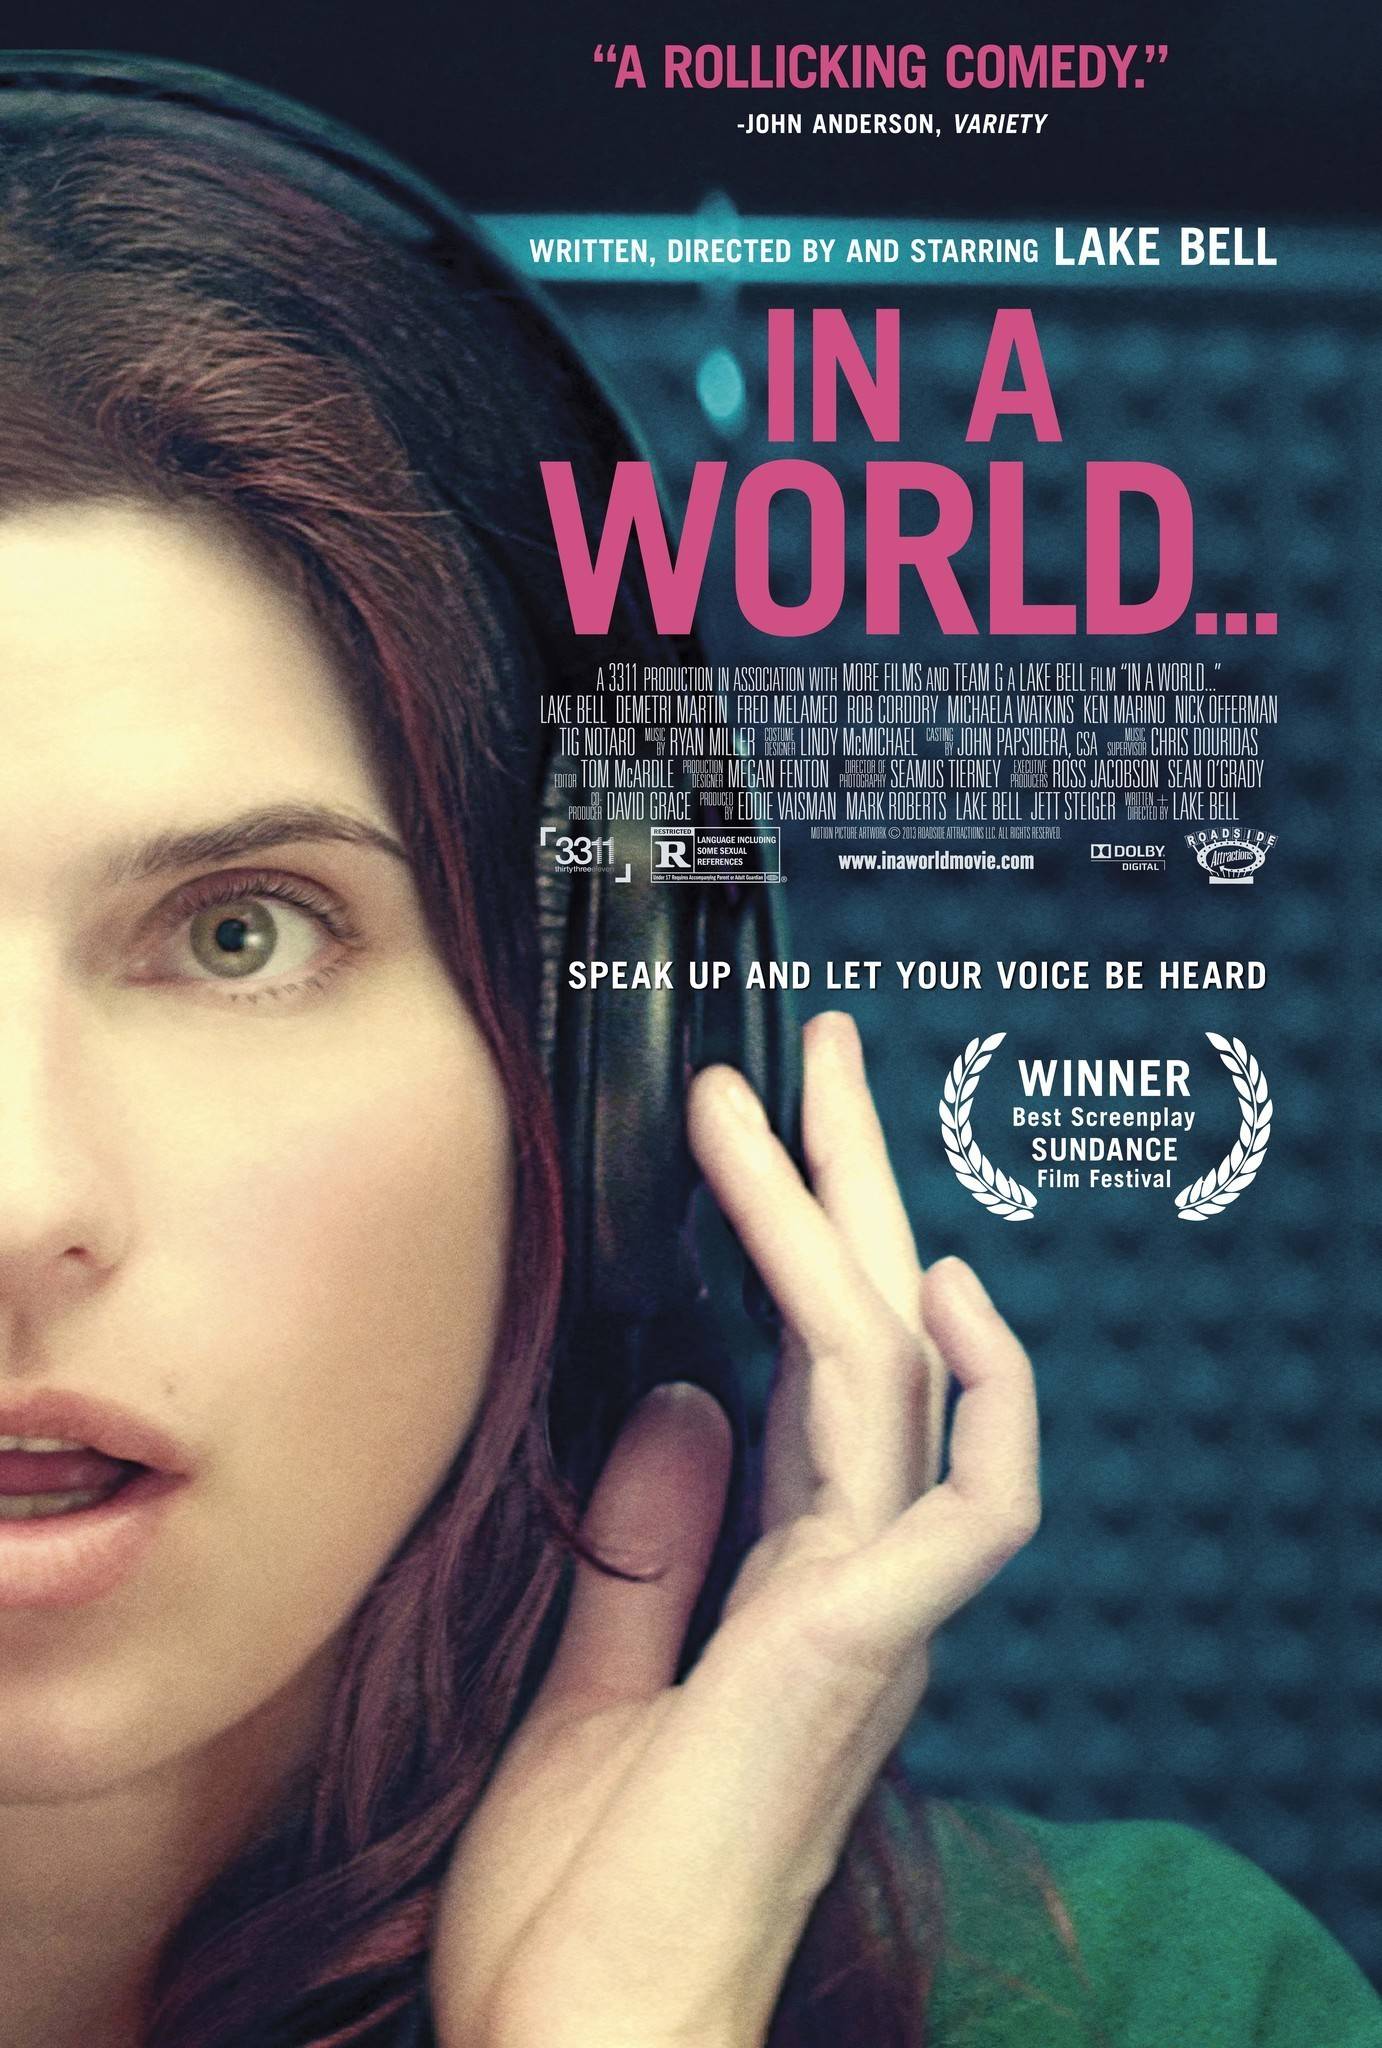 in-a-world-in-a-world-poster-art